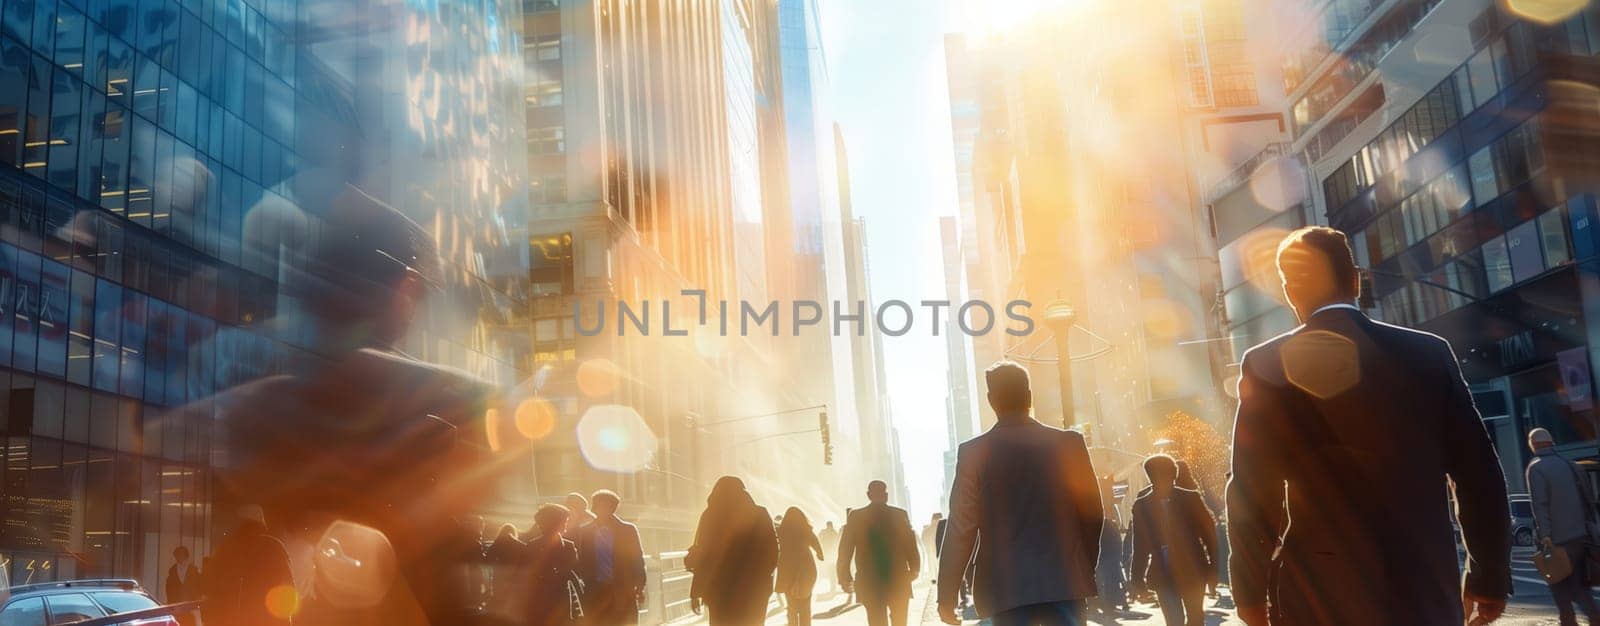 A group of people are strolling down a bustling city street, enjoying the urban landscape filled with towering buildings and glass skyscrapers on a hot day